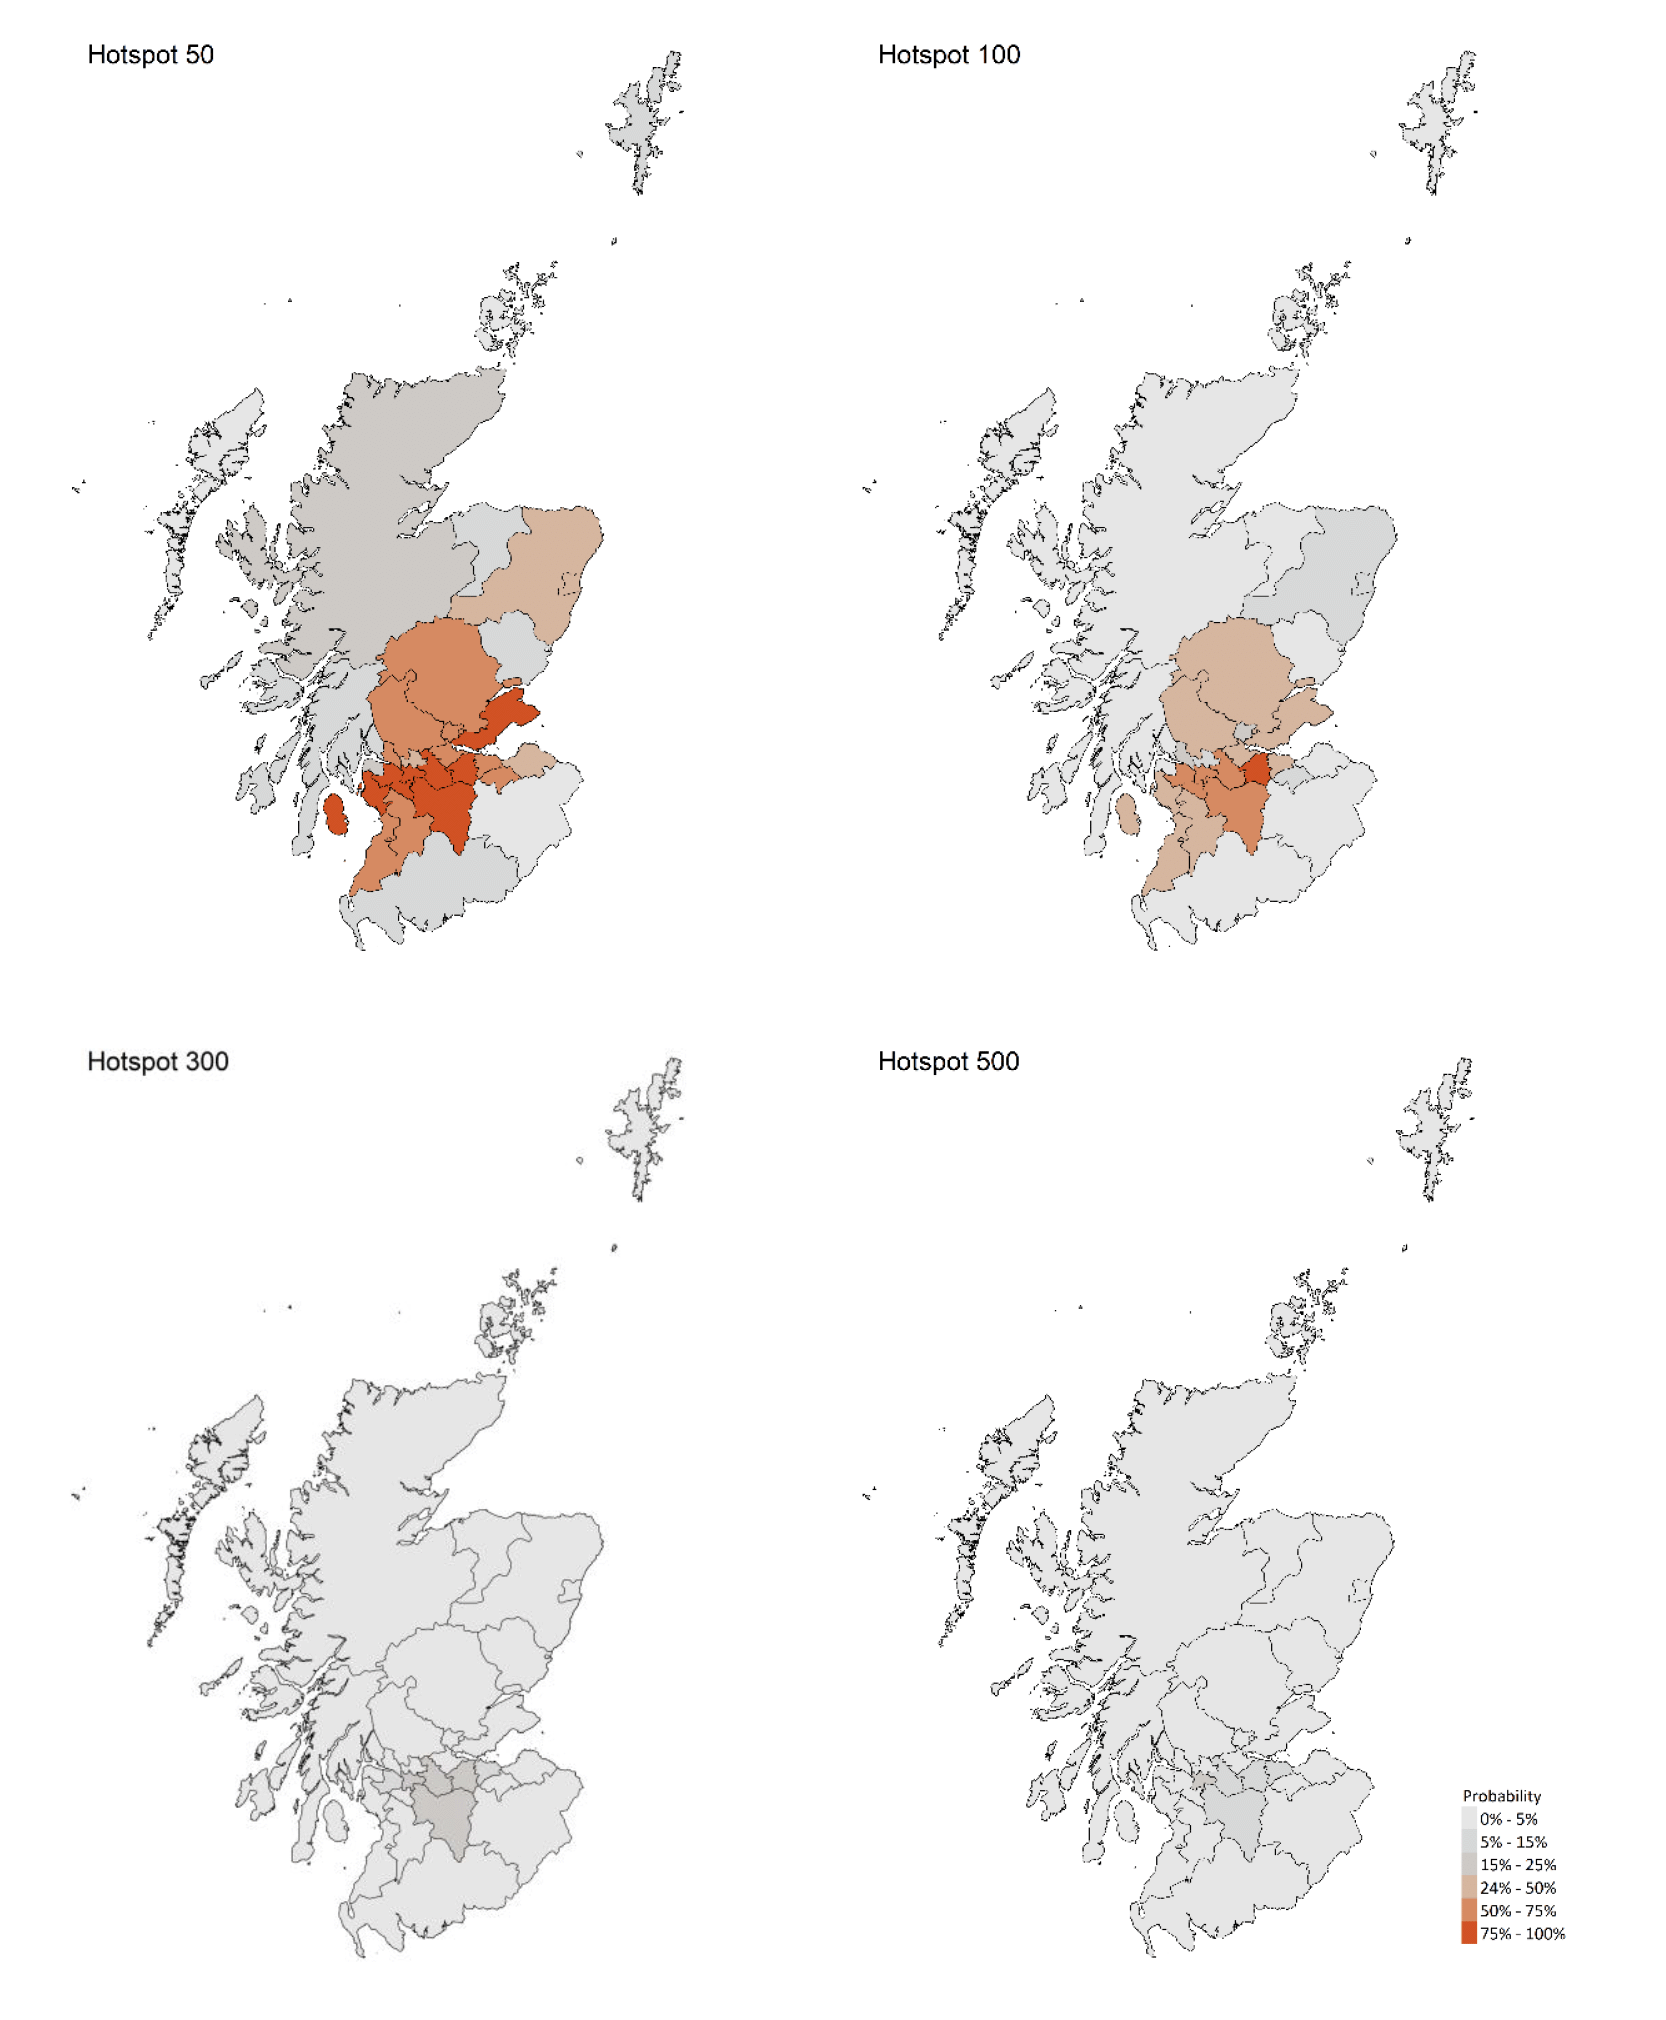 A series of four maps showing the probability of local authority areas having more than 50, 100, 300 or 500 cases per 100K (4 - 10 April 21).